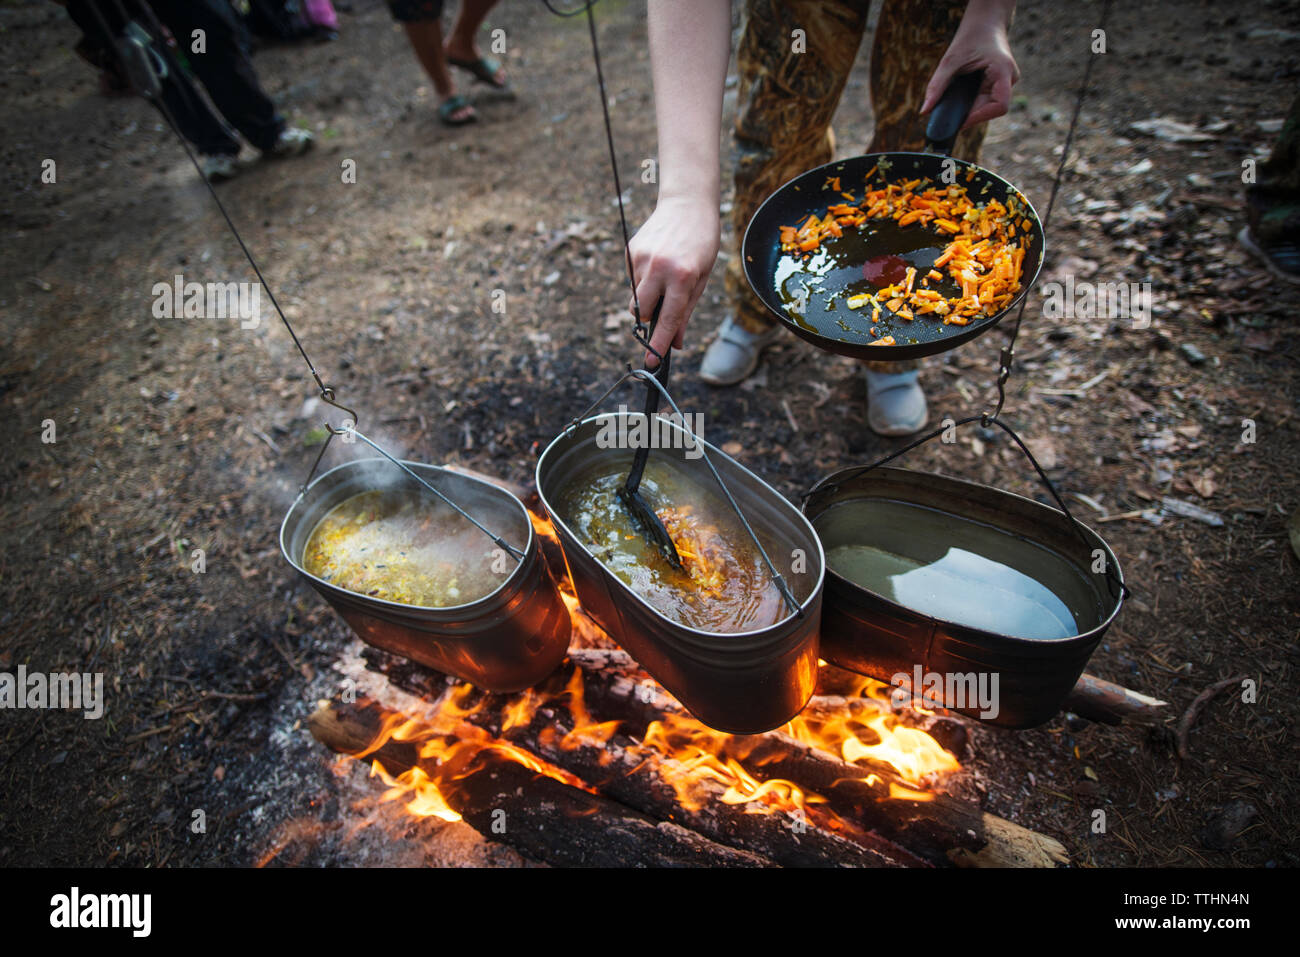 Low section of person preparing food in utensils over bonfire at campsite Stock Photo